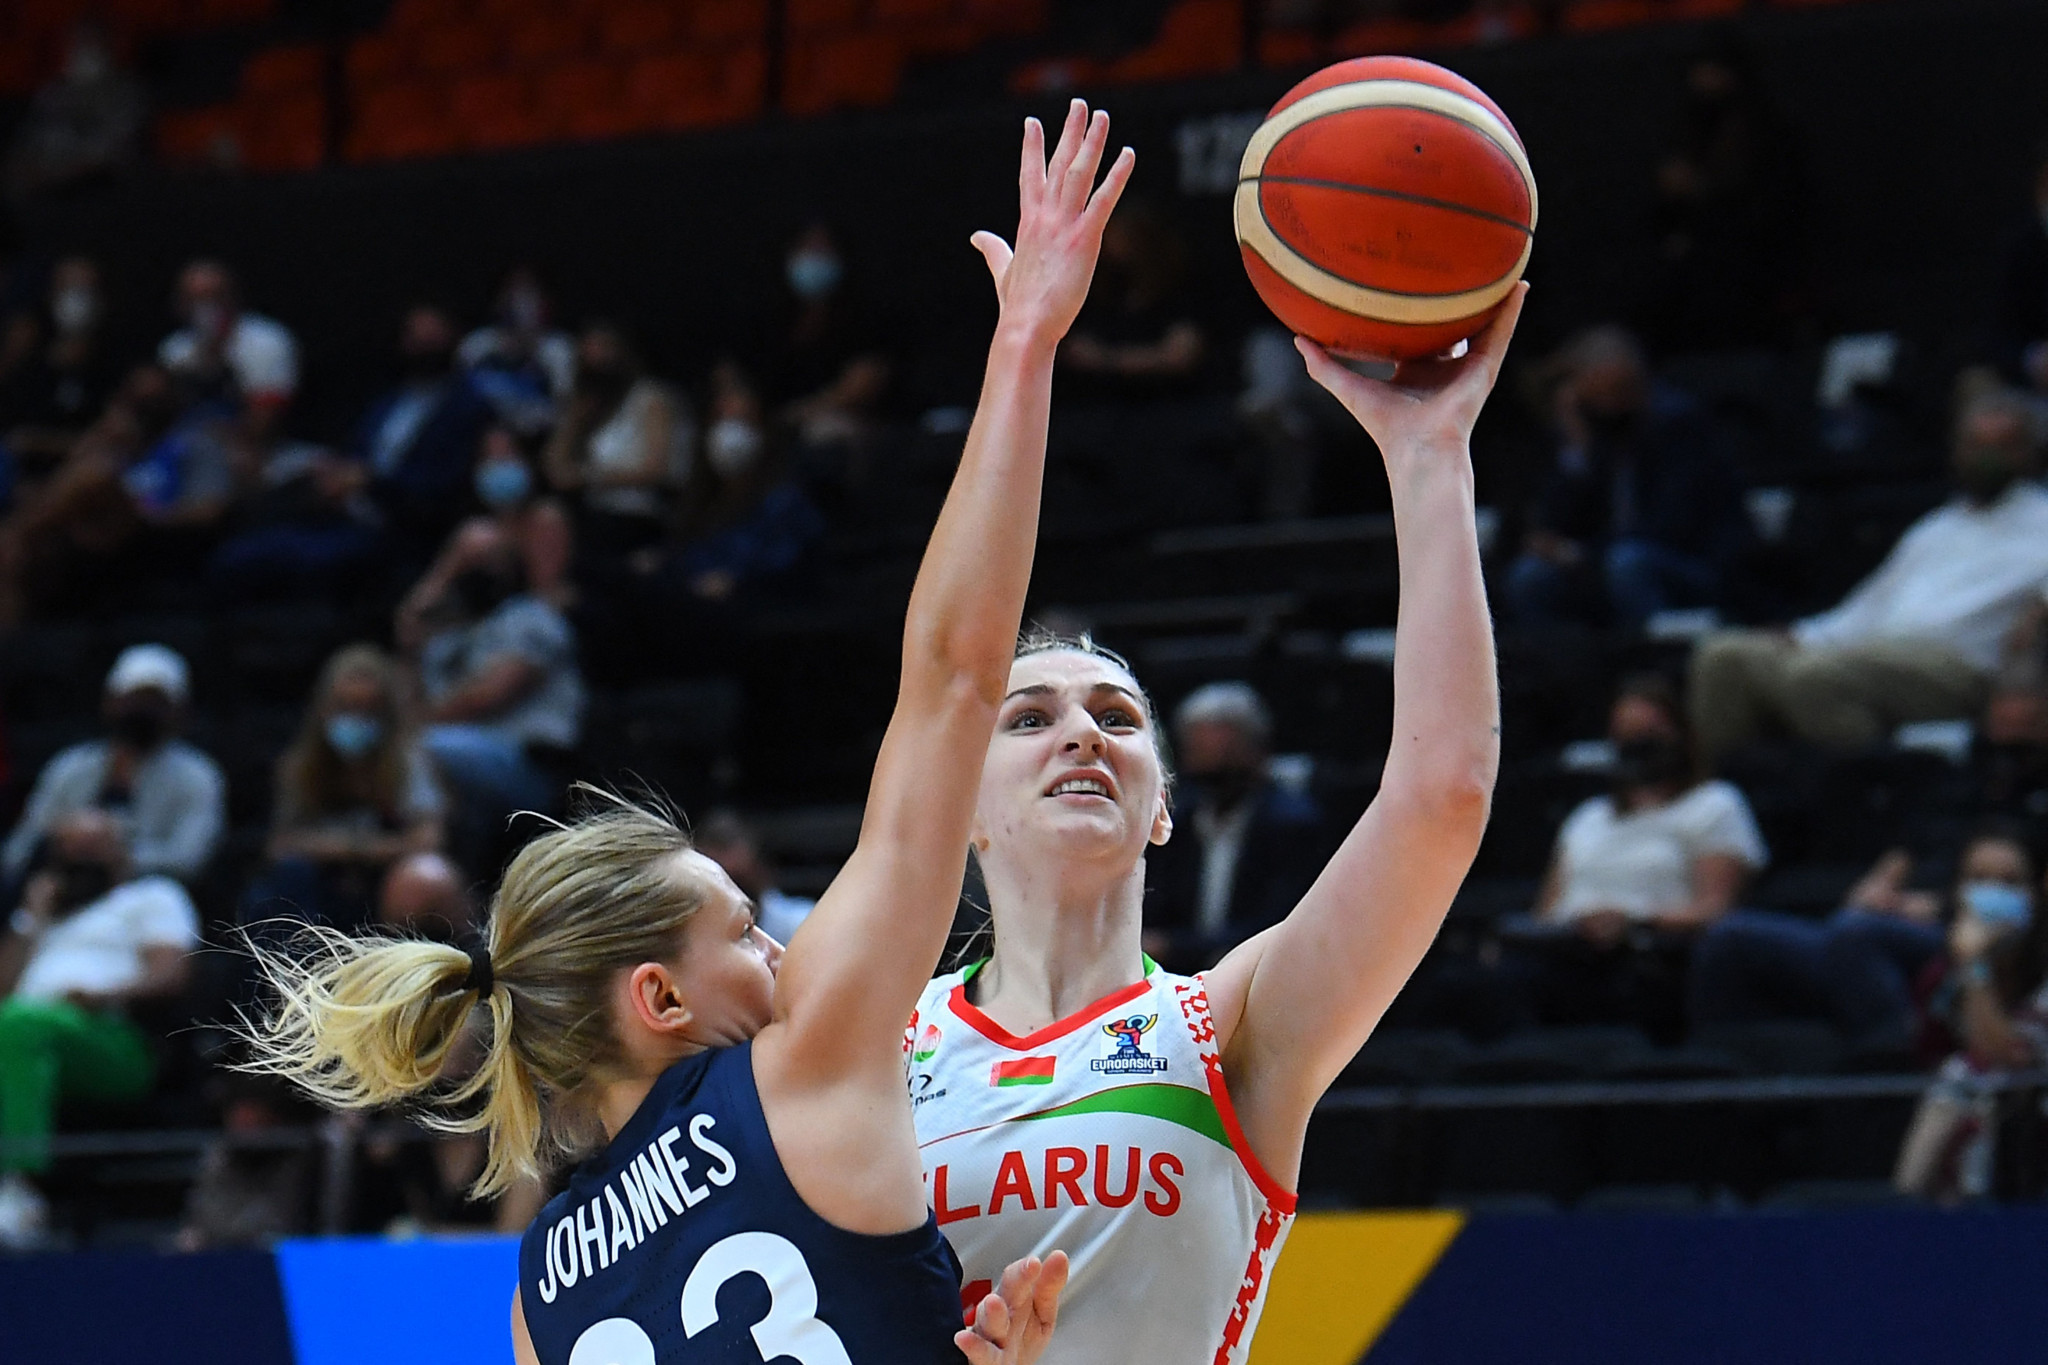 Russia and Belarus kicked out of Women's EuroBasket qualifying